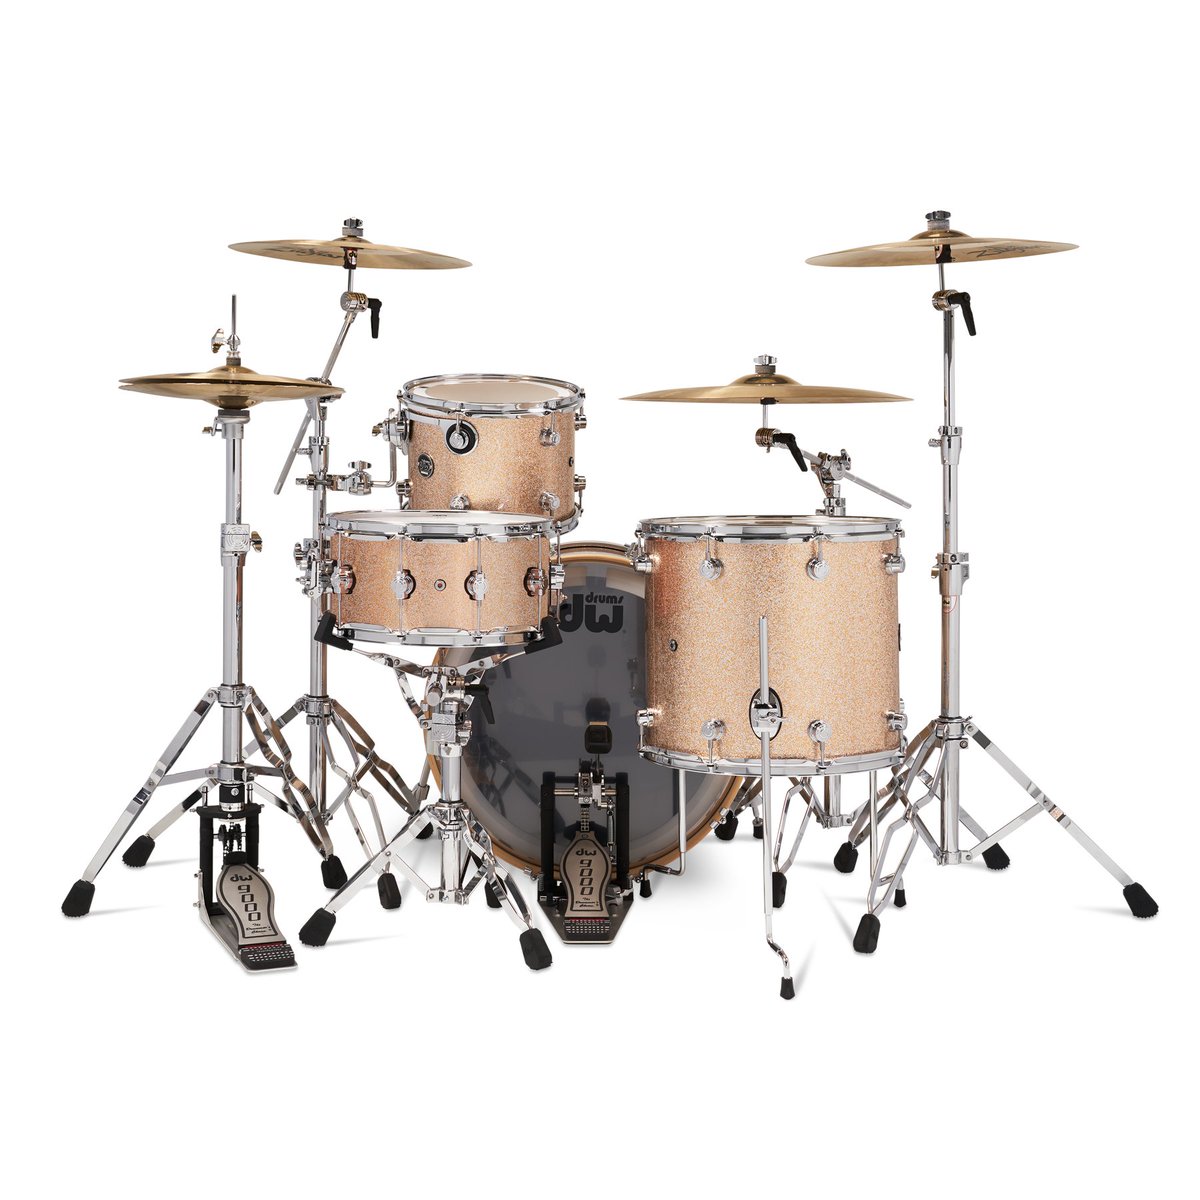 Introducing a tropical new DW finish. See a Performance Series™ finish fit for any beachfront venue. What do you think of this exciting new finish? Tell us in the comments below!